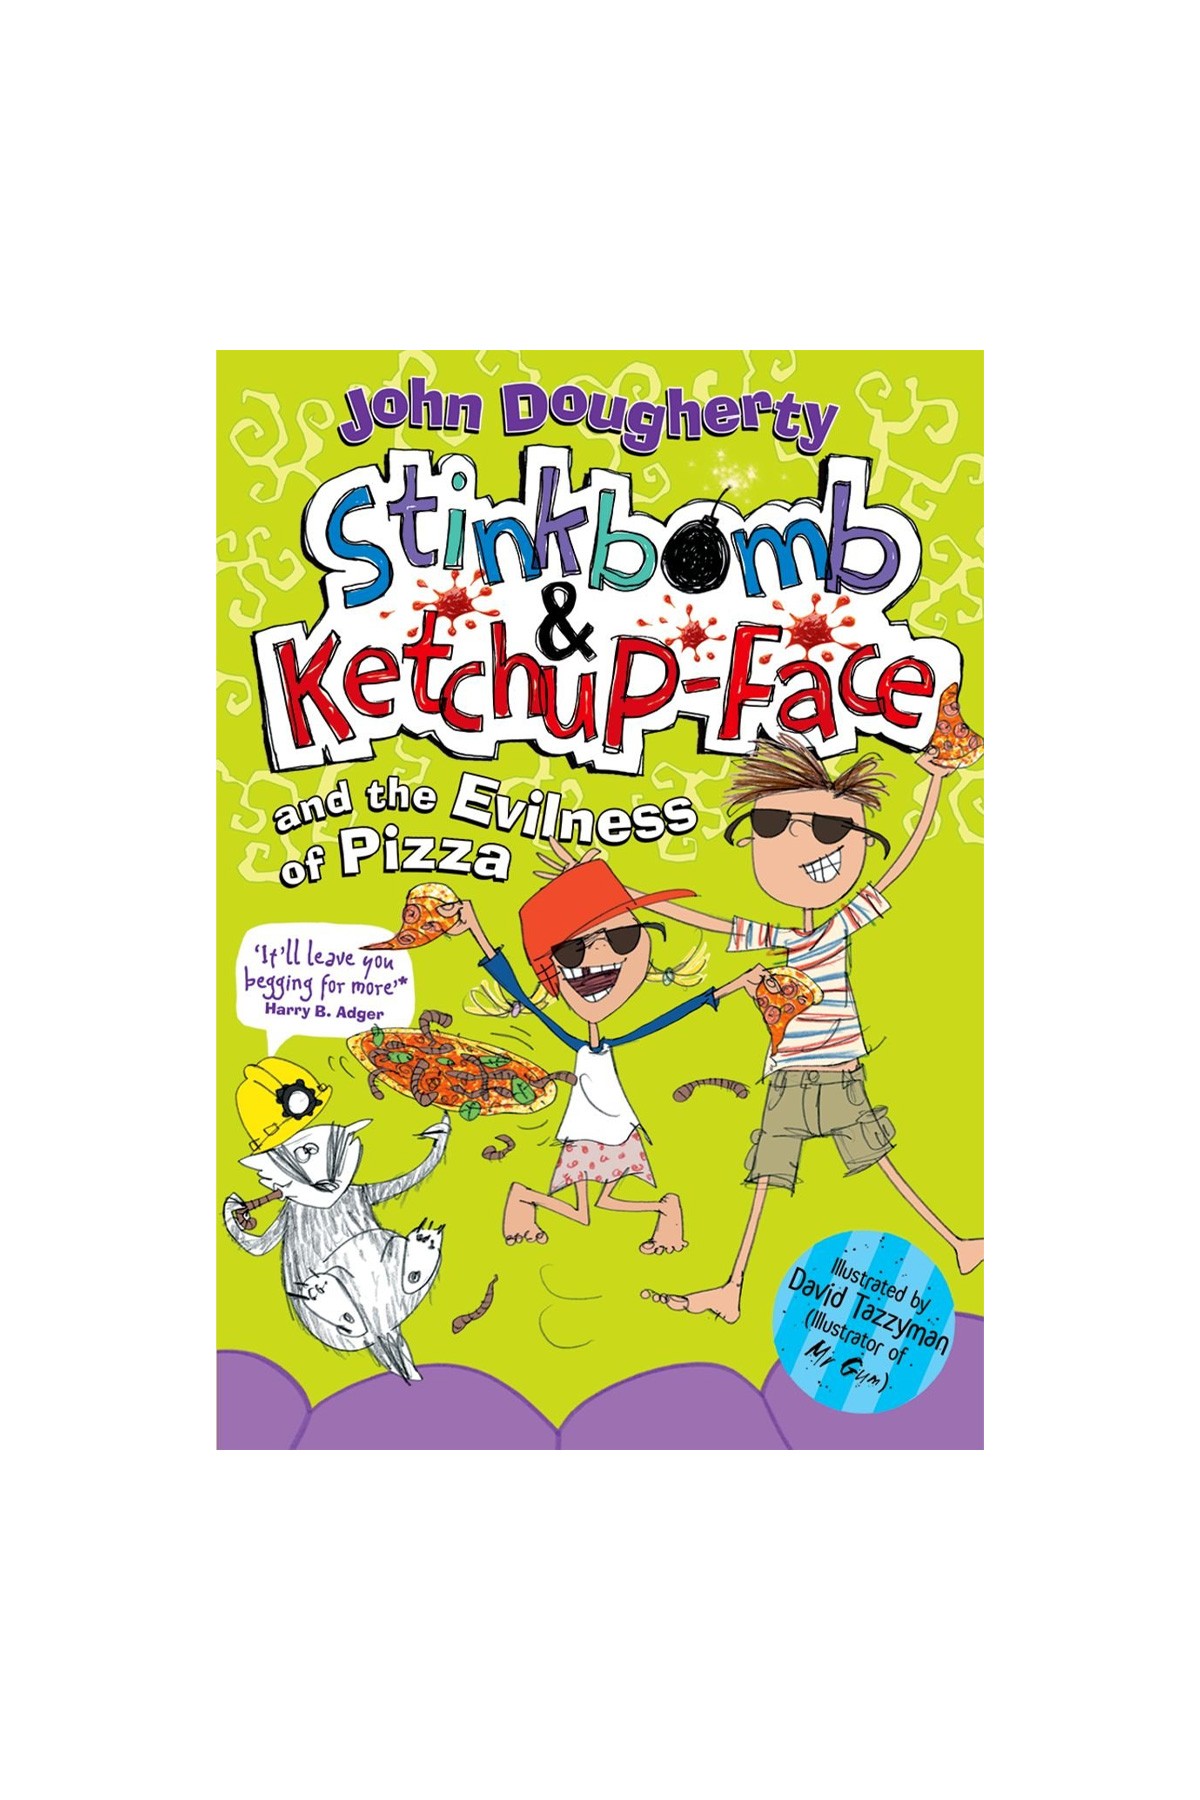 Oxford Childrens Book - Stinkbomb And Ketchup-Face And The Evilness Of Pizza